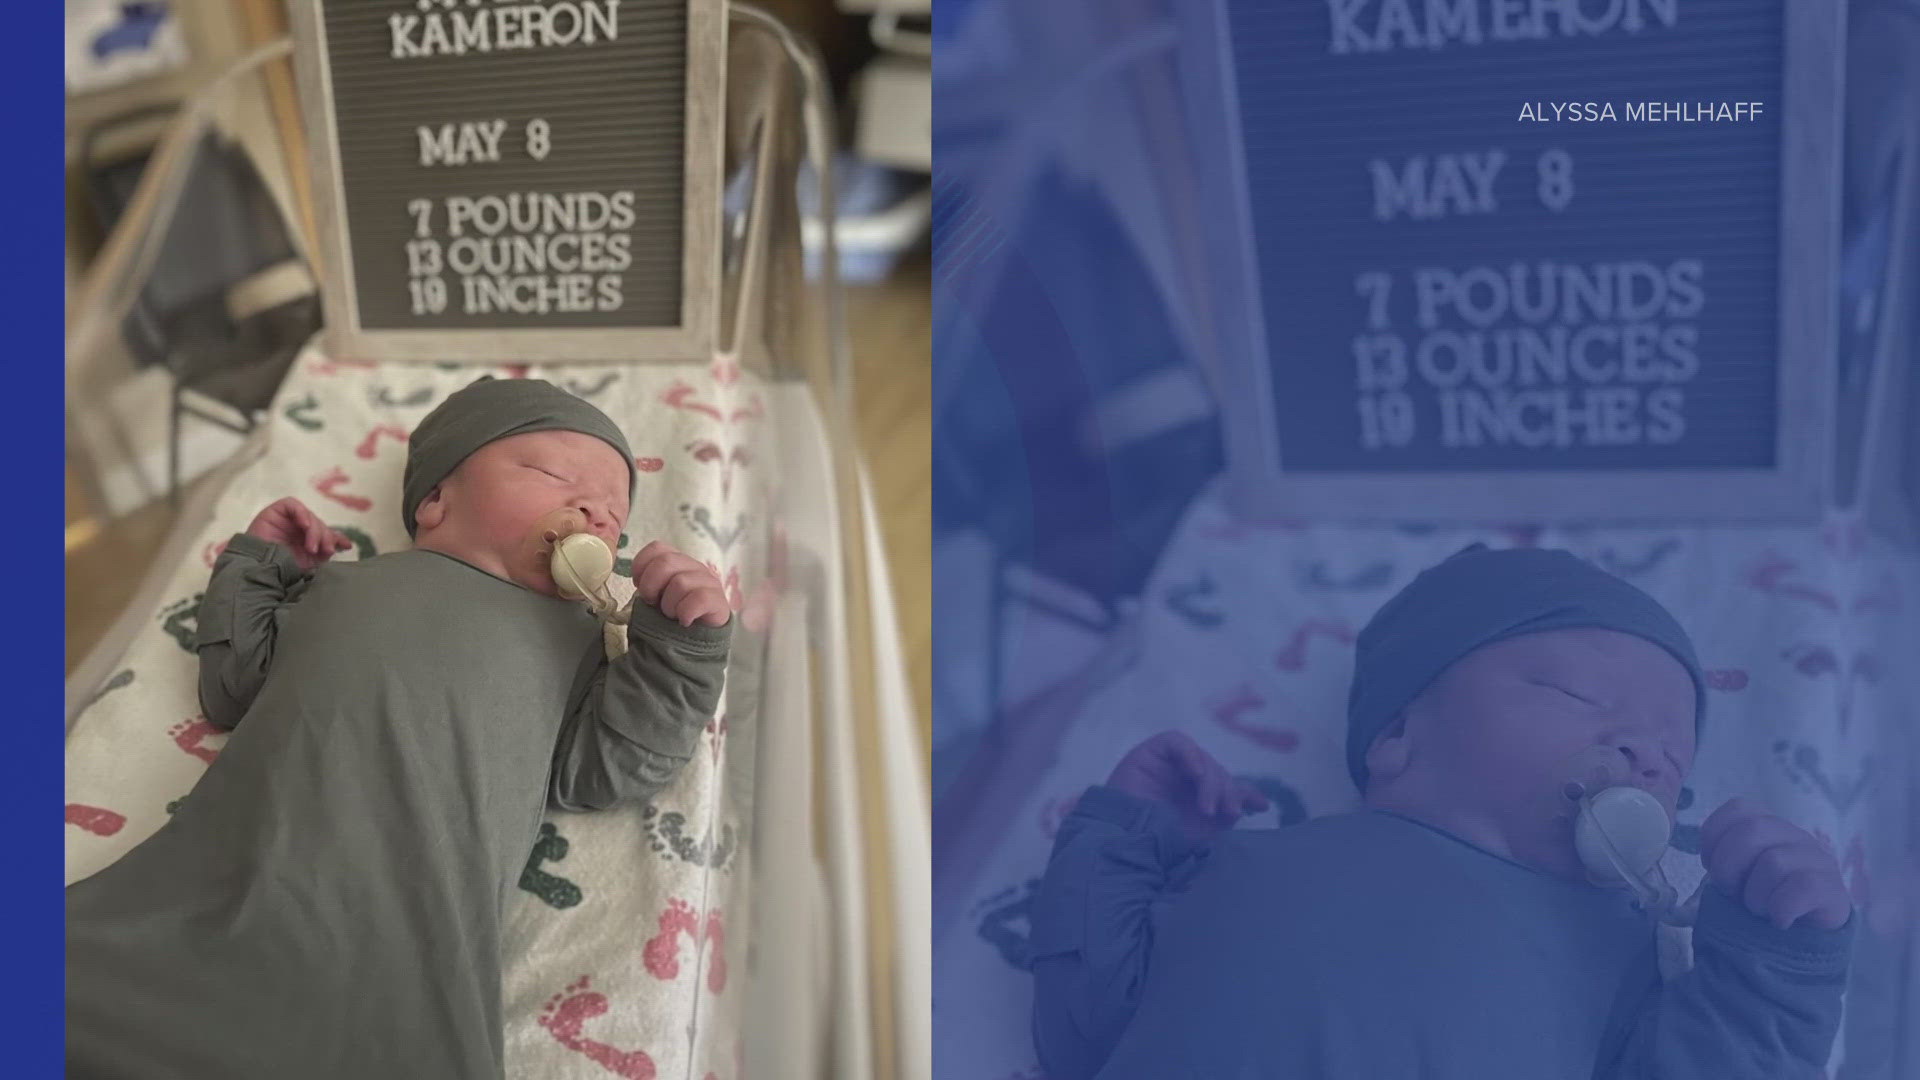 His parents say they were watching the game in the hospital when it went into overtime and they decided to name their little guy after the next player to score.